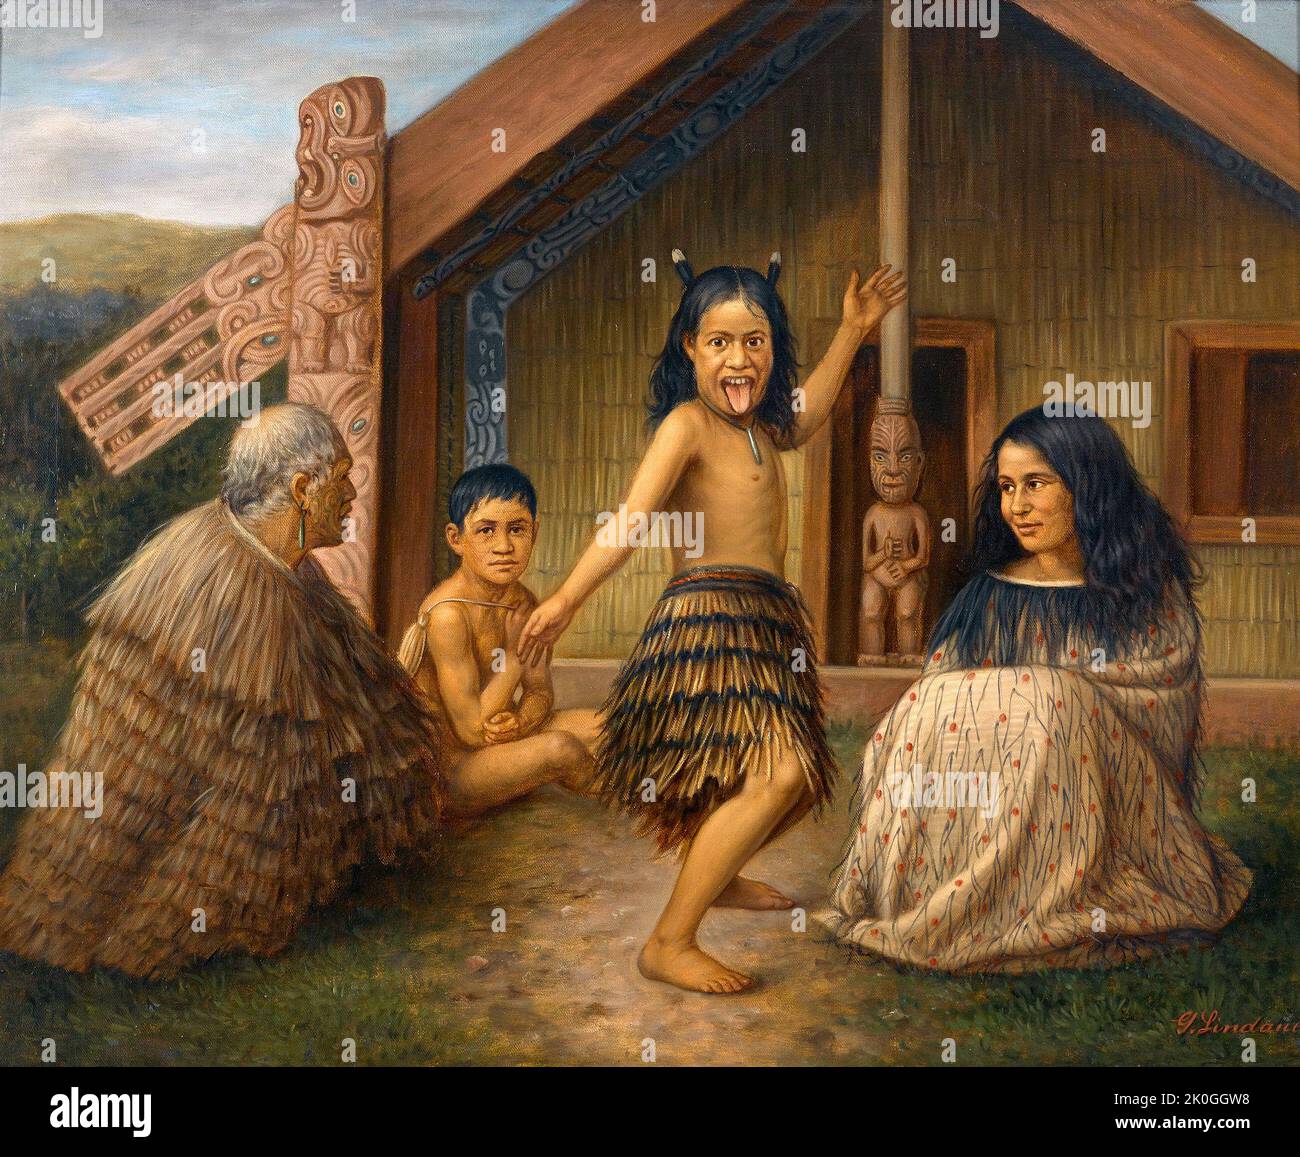 Maori girl learning the haka, by Gottfried Lindauer with oil on canvas. Stock Photo